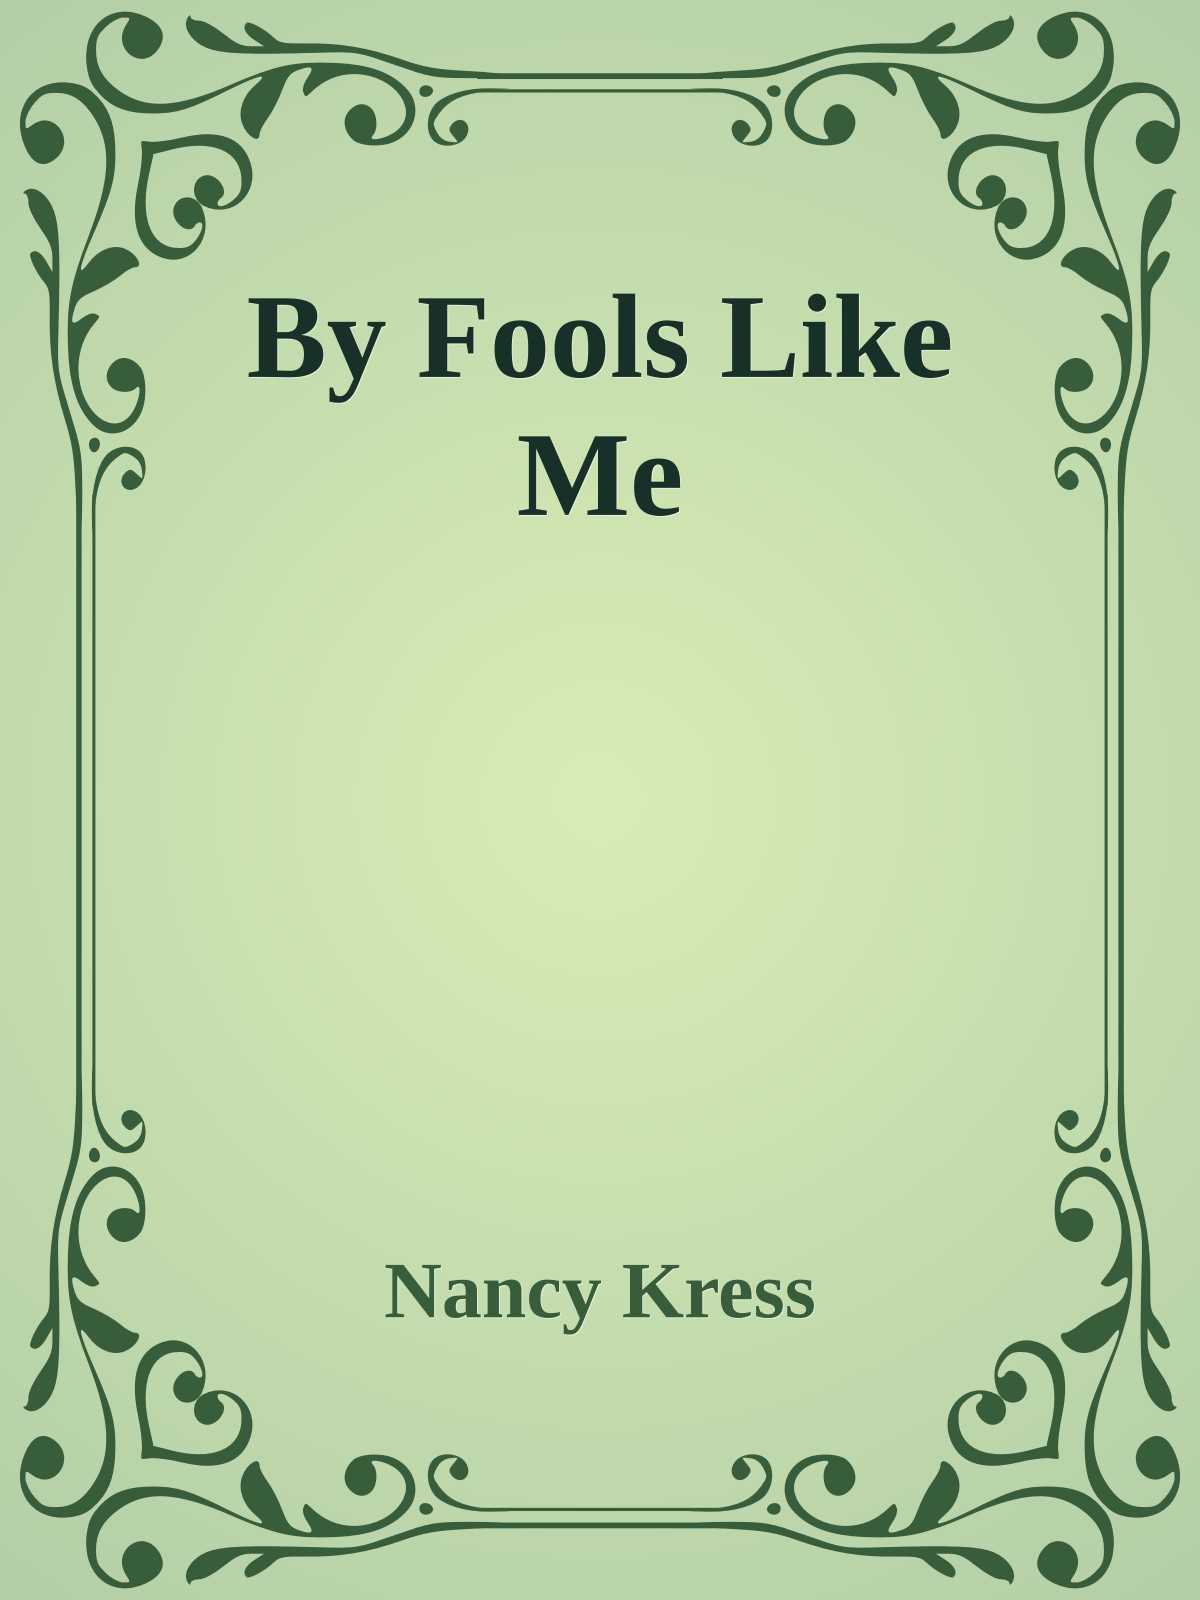 By Fools Like Me